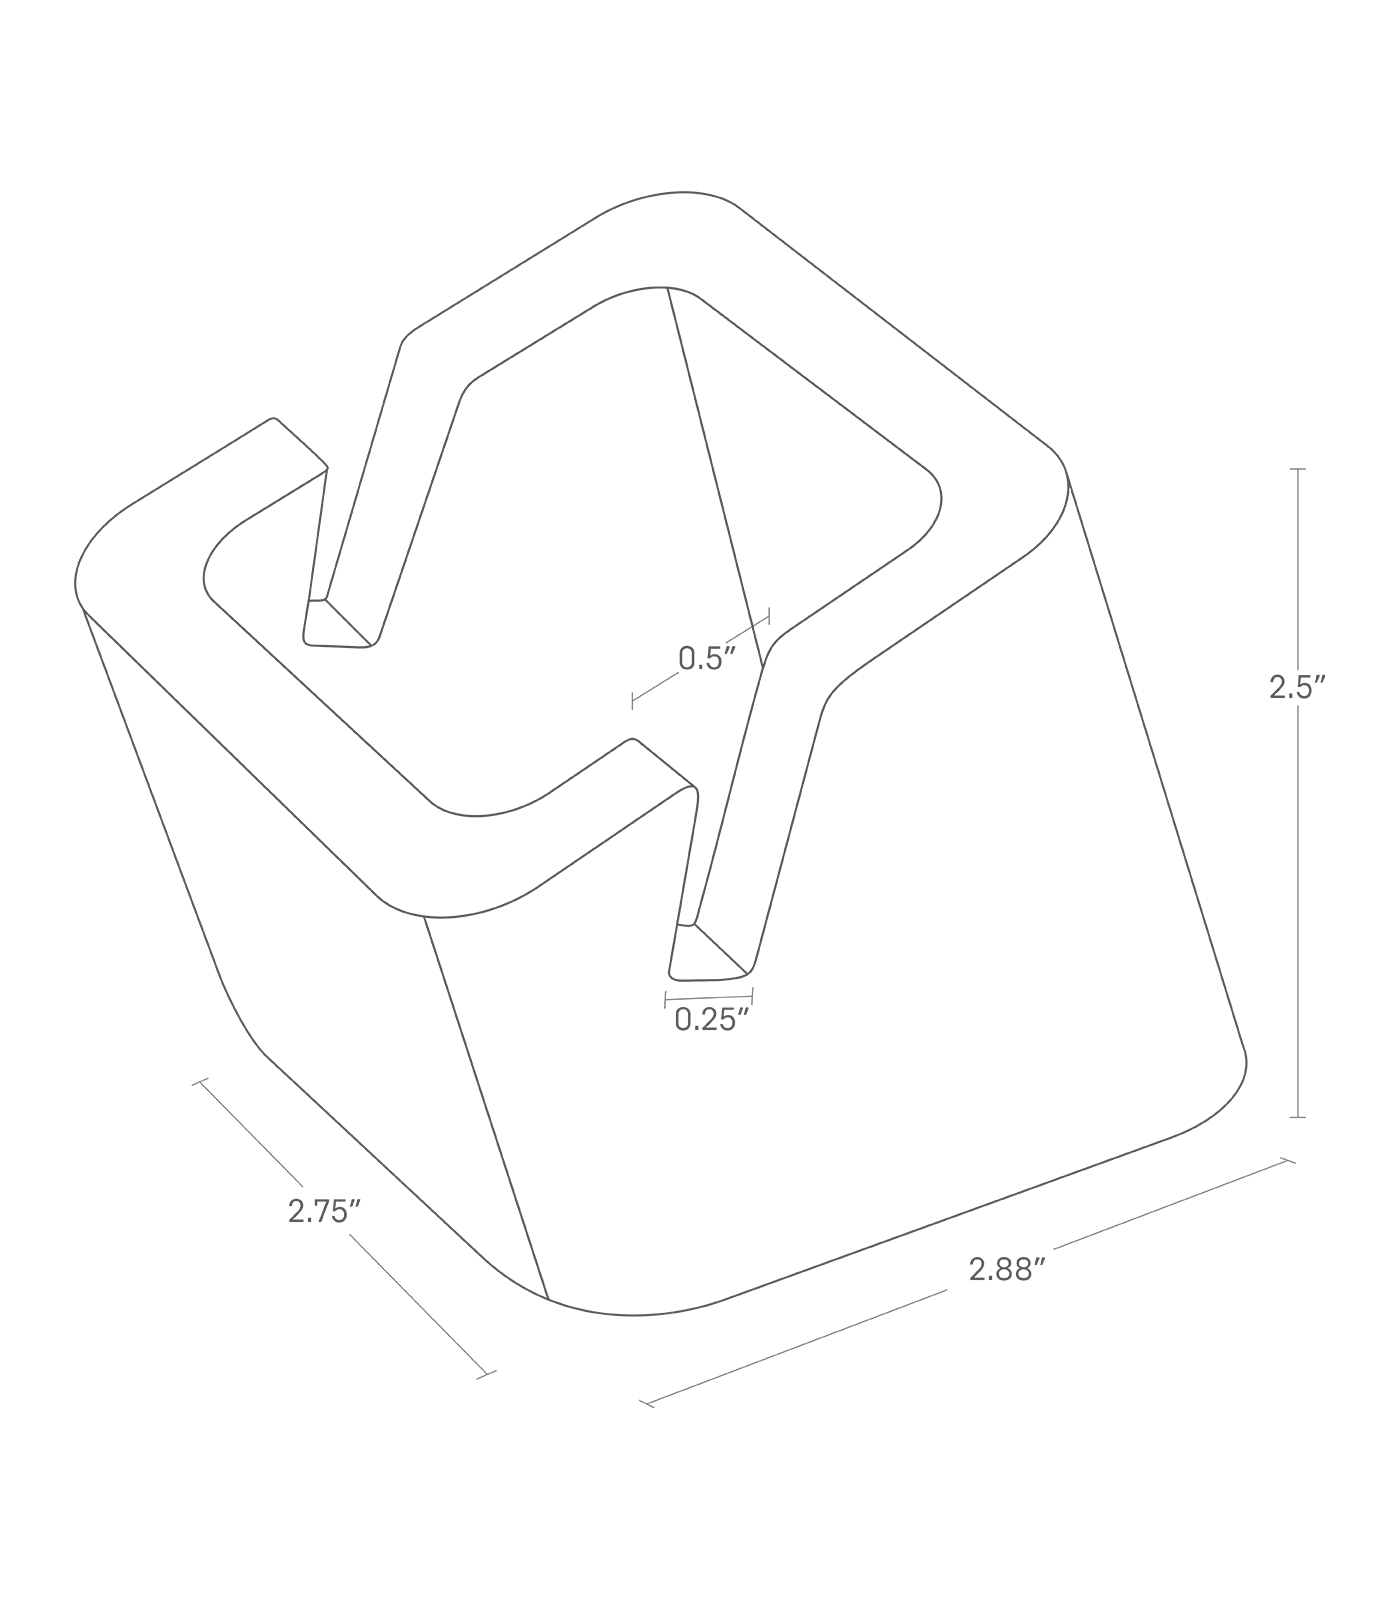 Dimension image for Tablet Stand on a white background with length of 2.88'', a width of 2.75'', a height of 2.5'', a tablet notch that is 0.5'' at the opening and 0.25'' at the base.